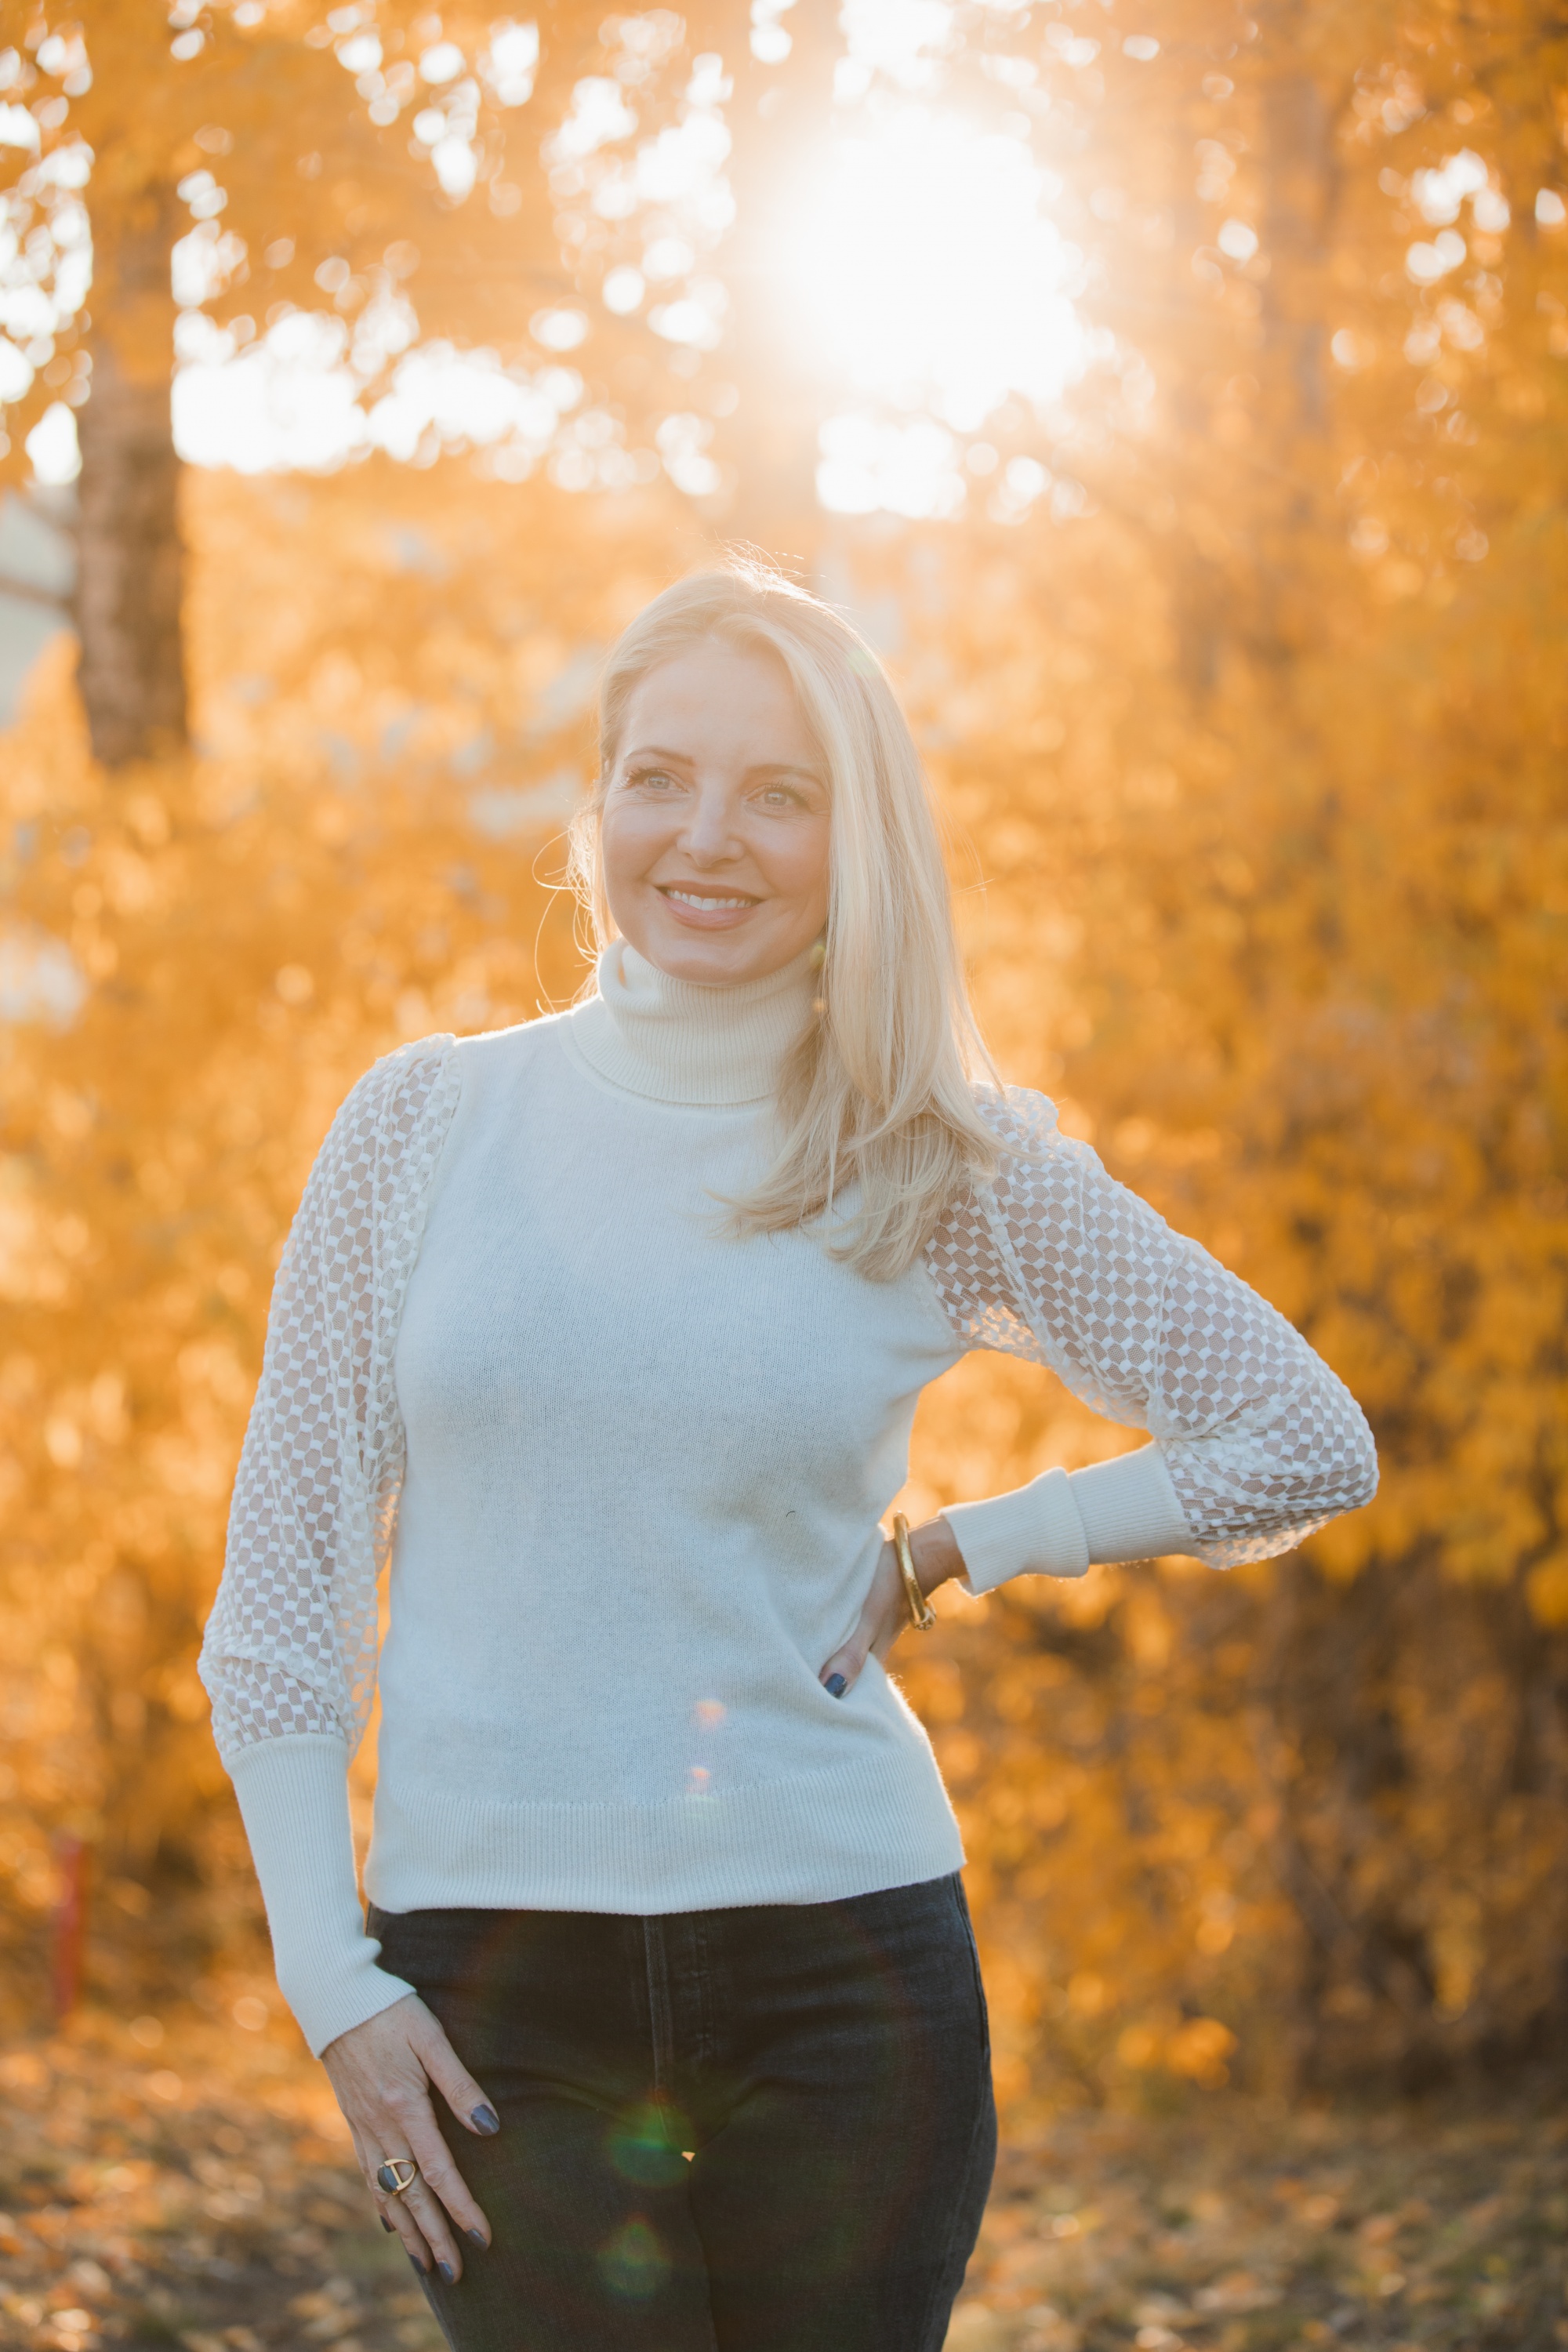 Fall sweater, Erin Busbee of Busbee Style wearing an ivory Aqua cashmere turtleneck sweater with mesh sleeves with dark gray jeans by Agolde in Telluride, Colorado